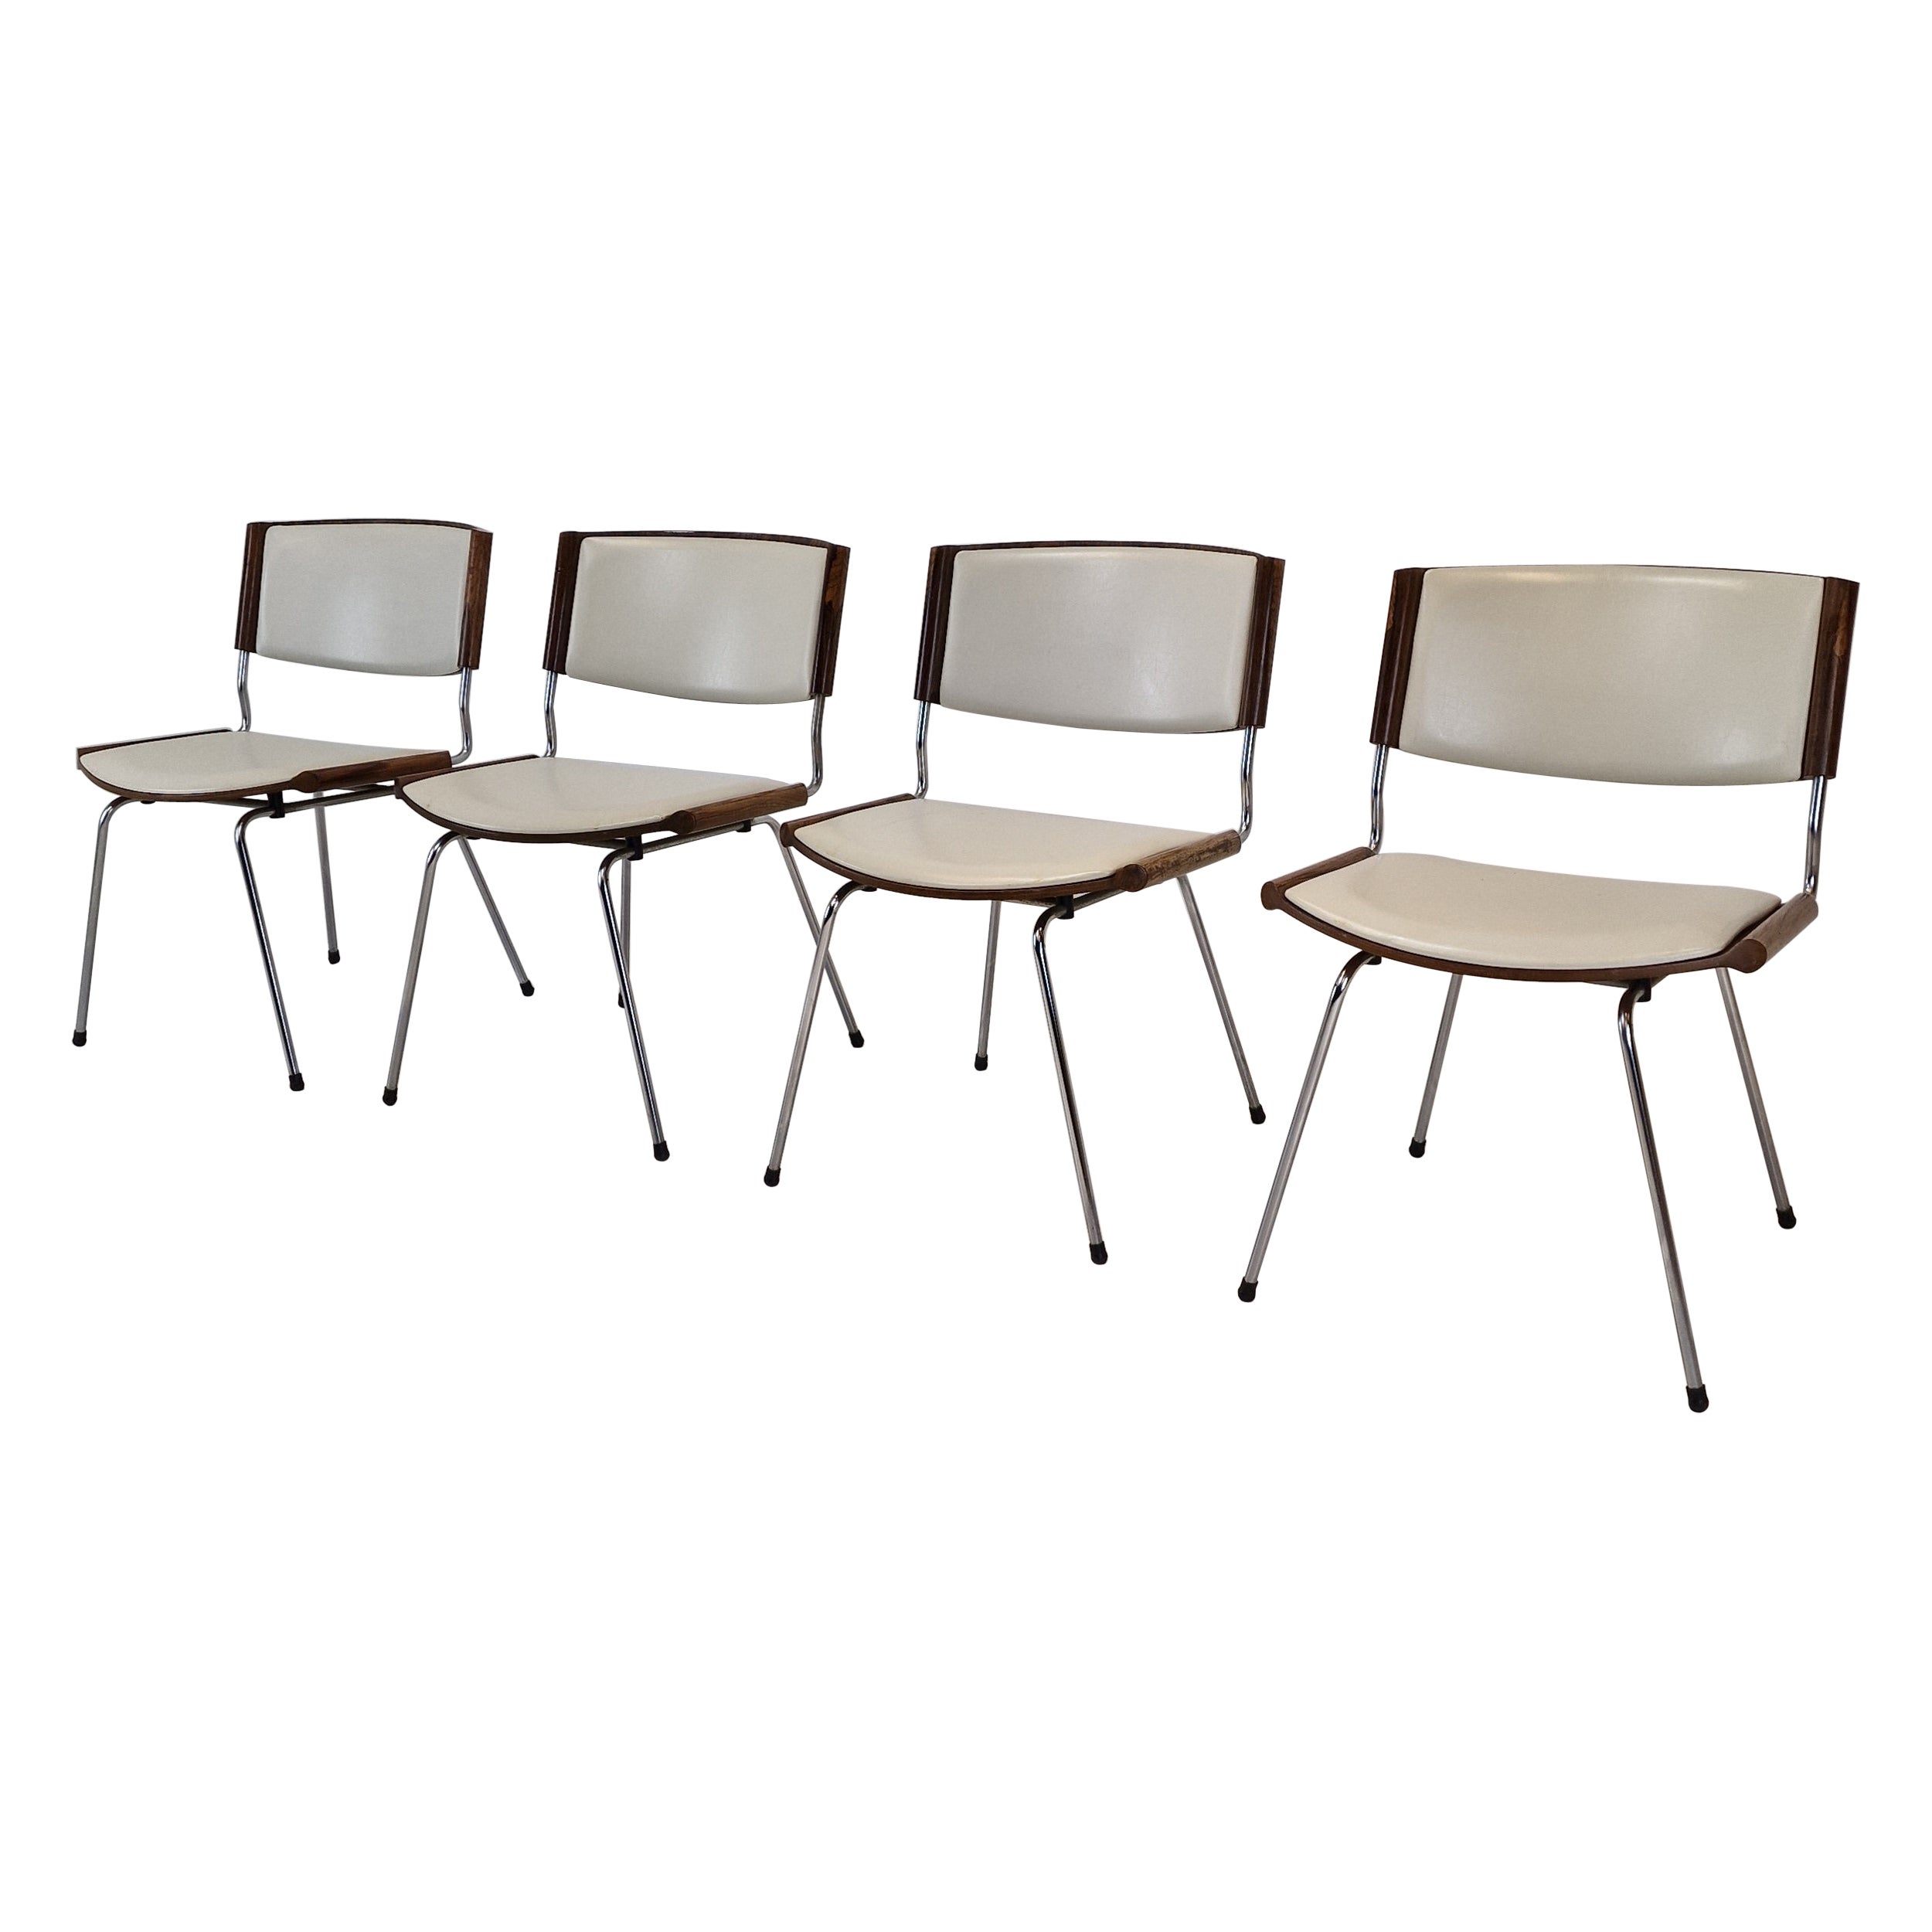 Set of 4 "Badminton" Dining Chairs by Nanna Ditzel for Kolds Savvaerk, 1960's For Sale